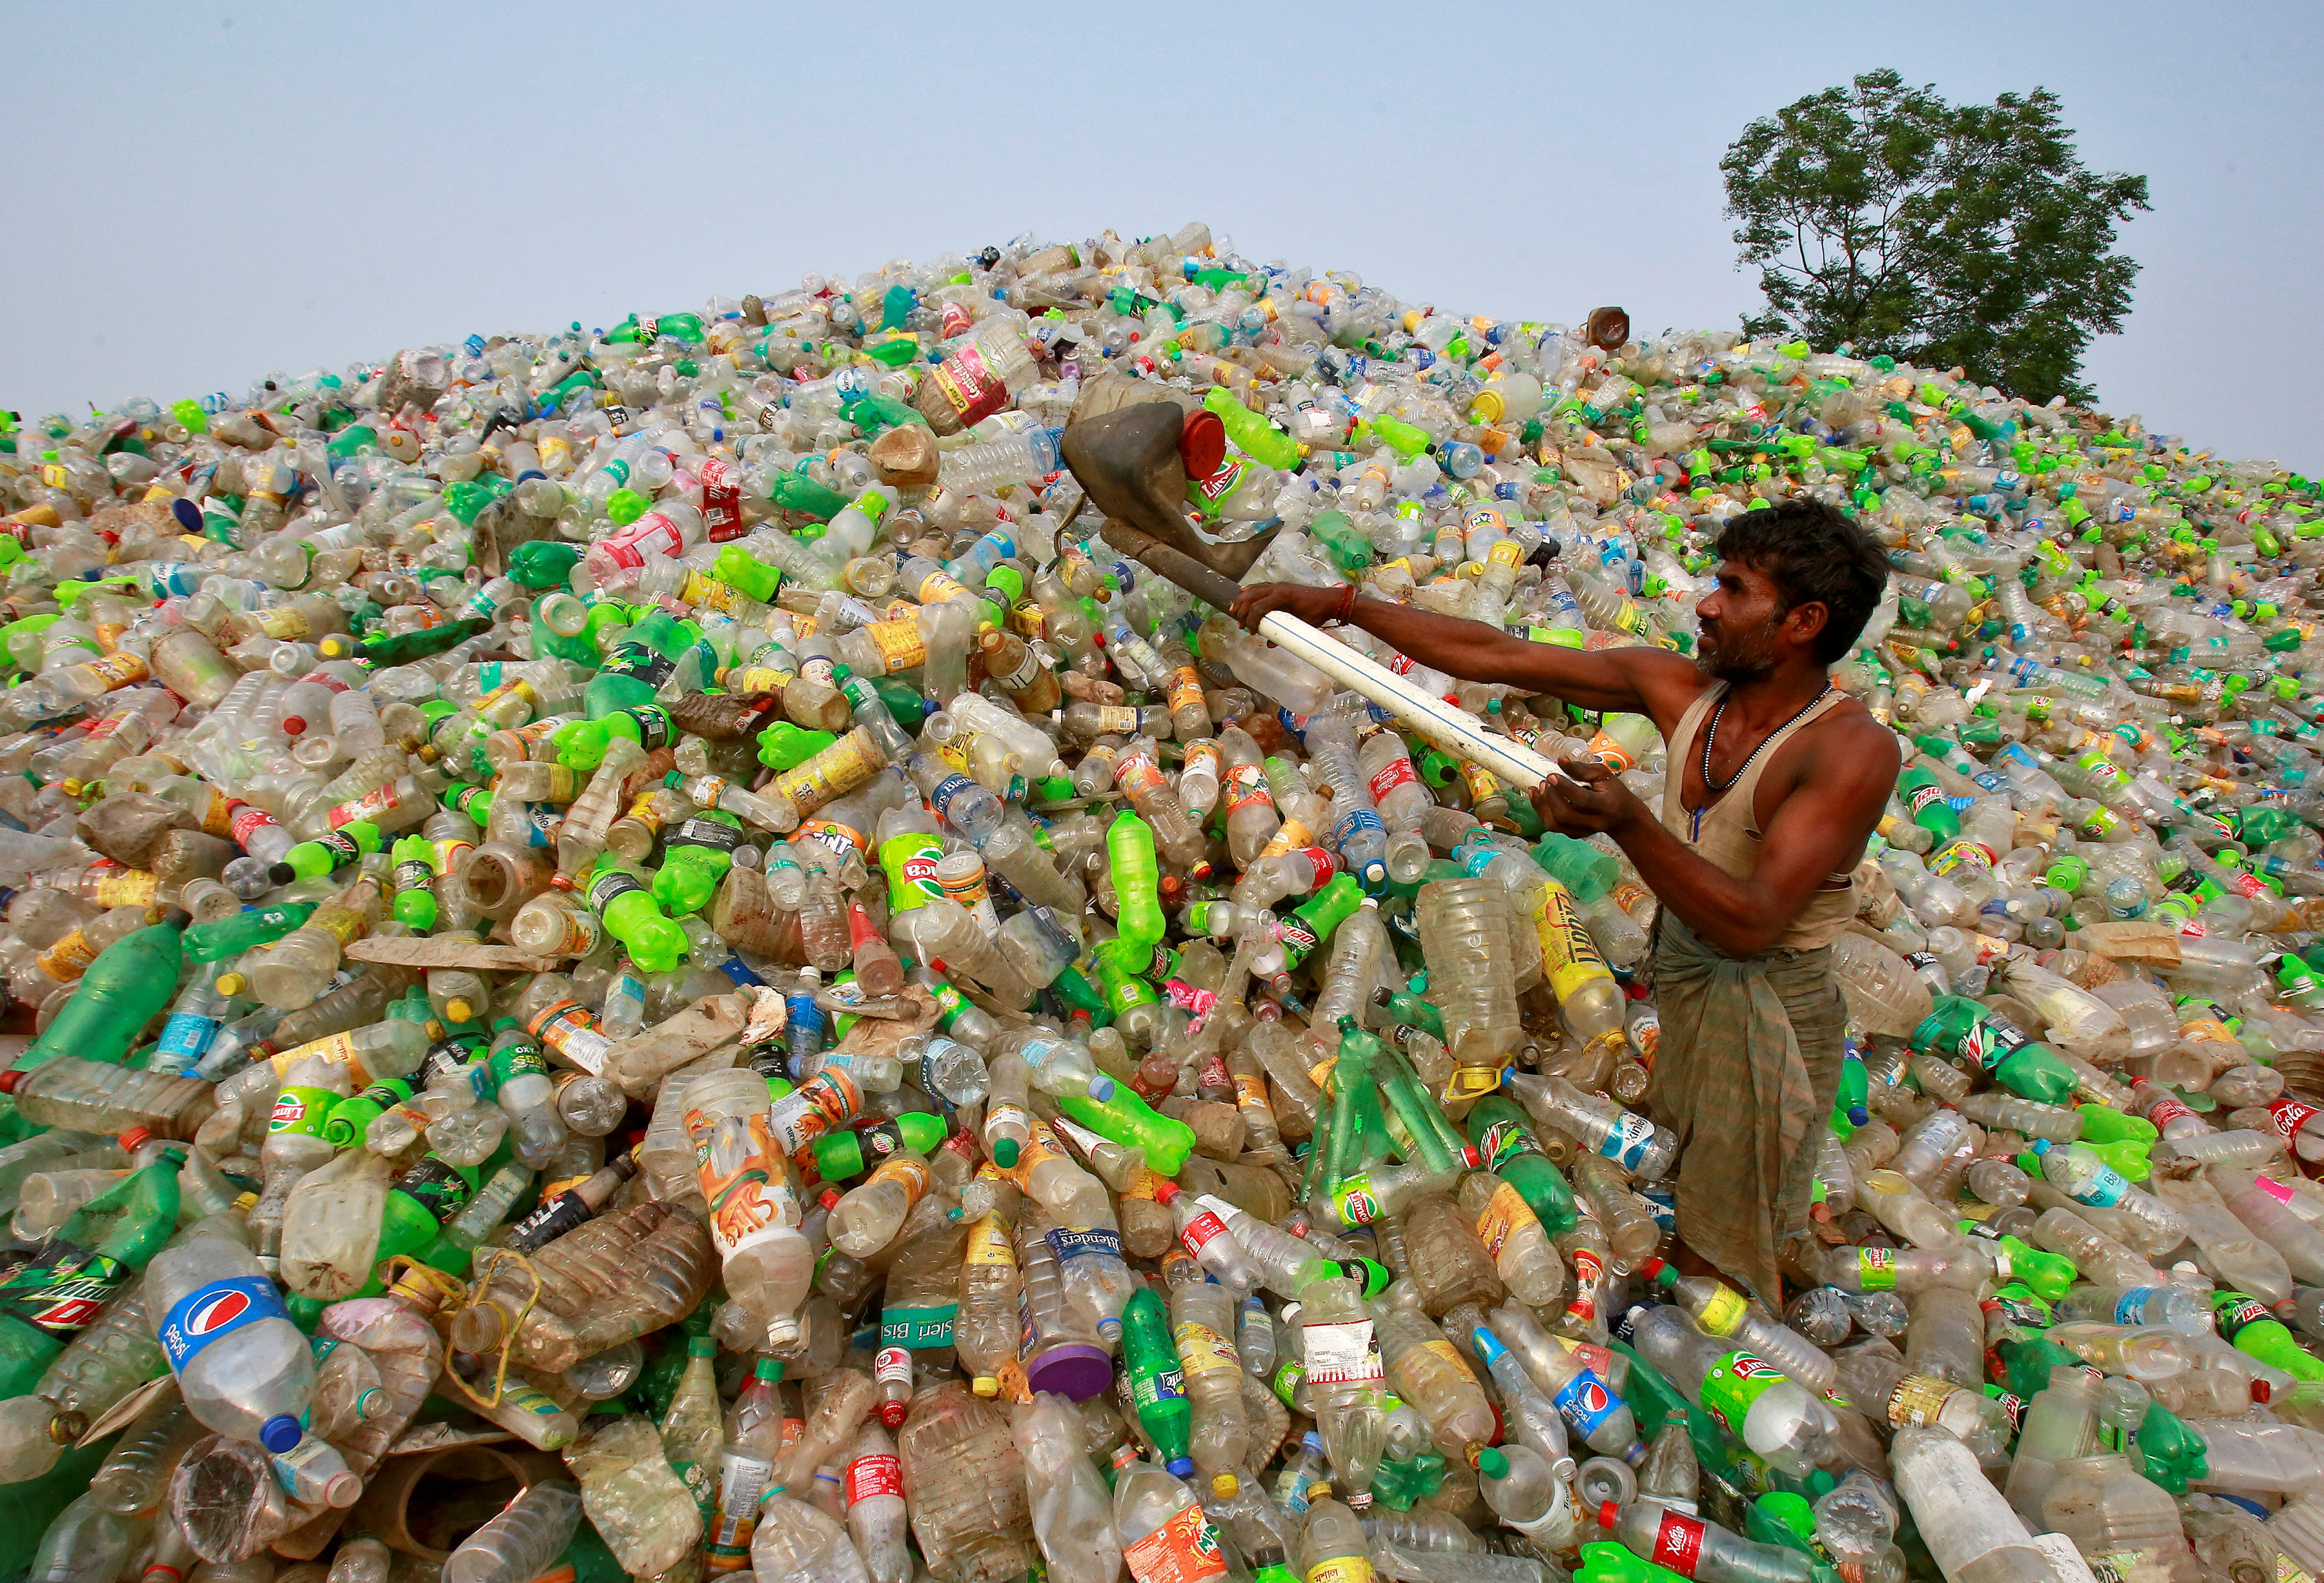 A man makes a heap of plastic bottles at a junkyard on World Environment Day in Chandigarh